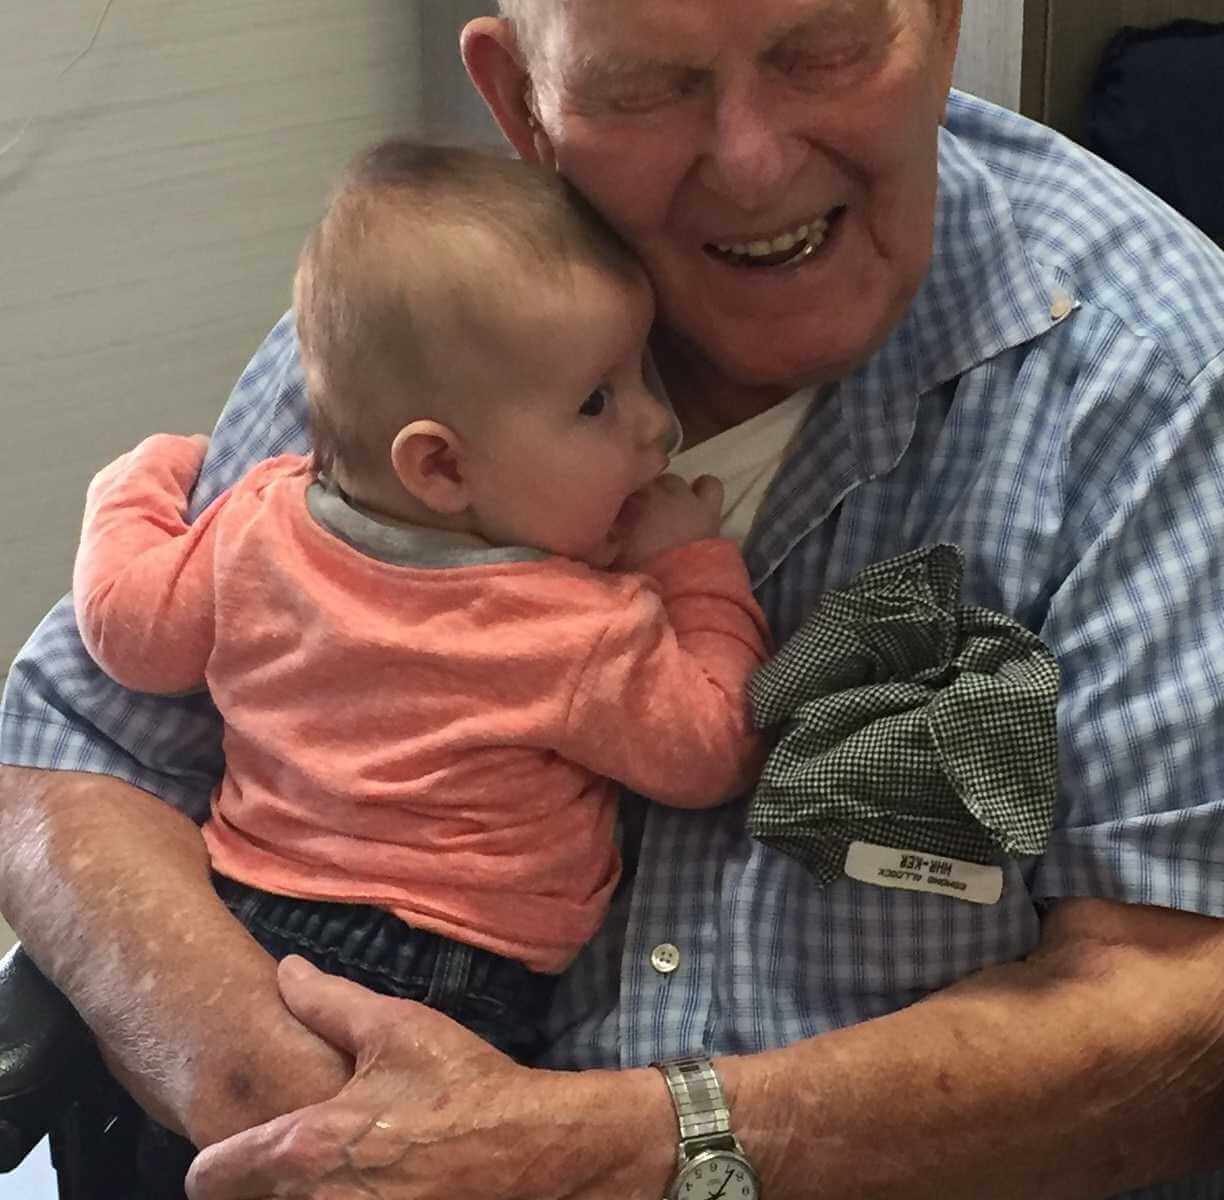 Heartwarming Story Of The 108-year-old Who Met His 1-year-old Namesake